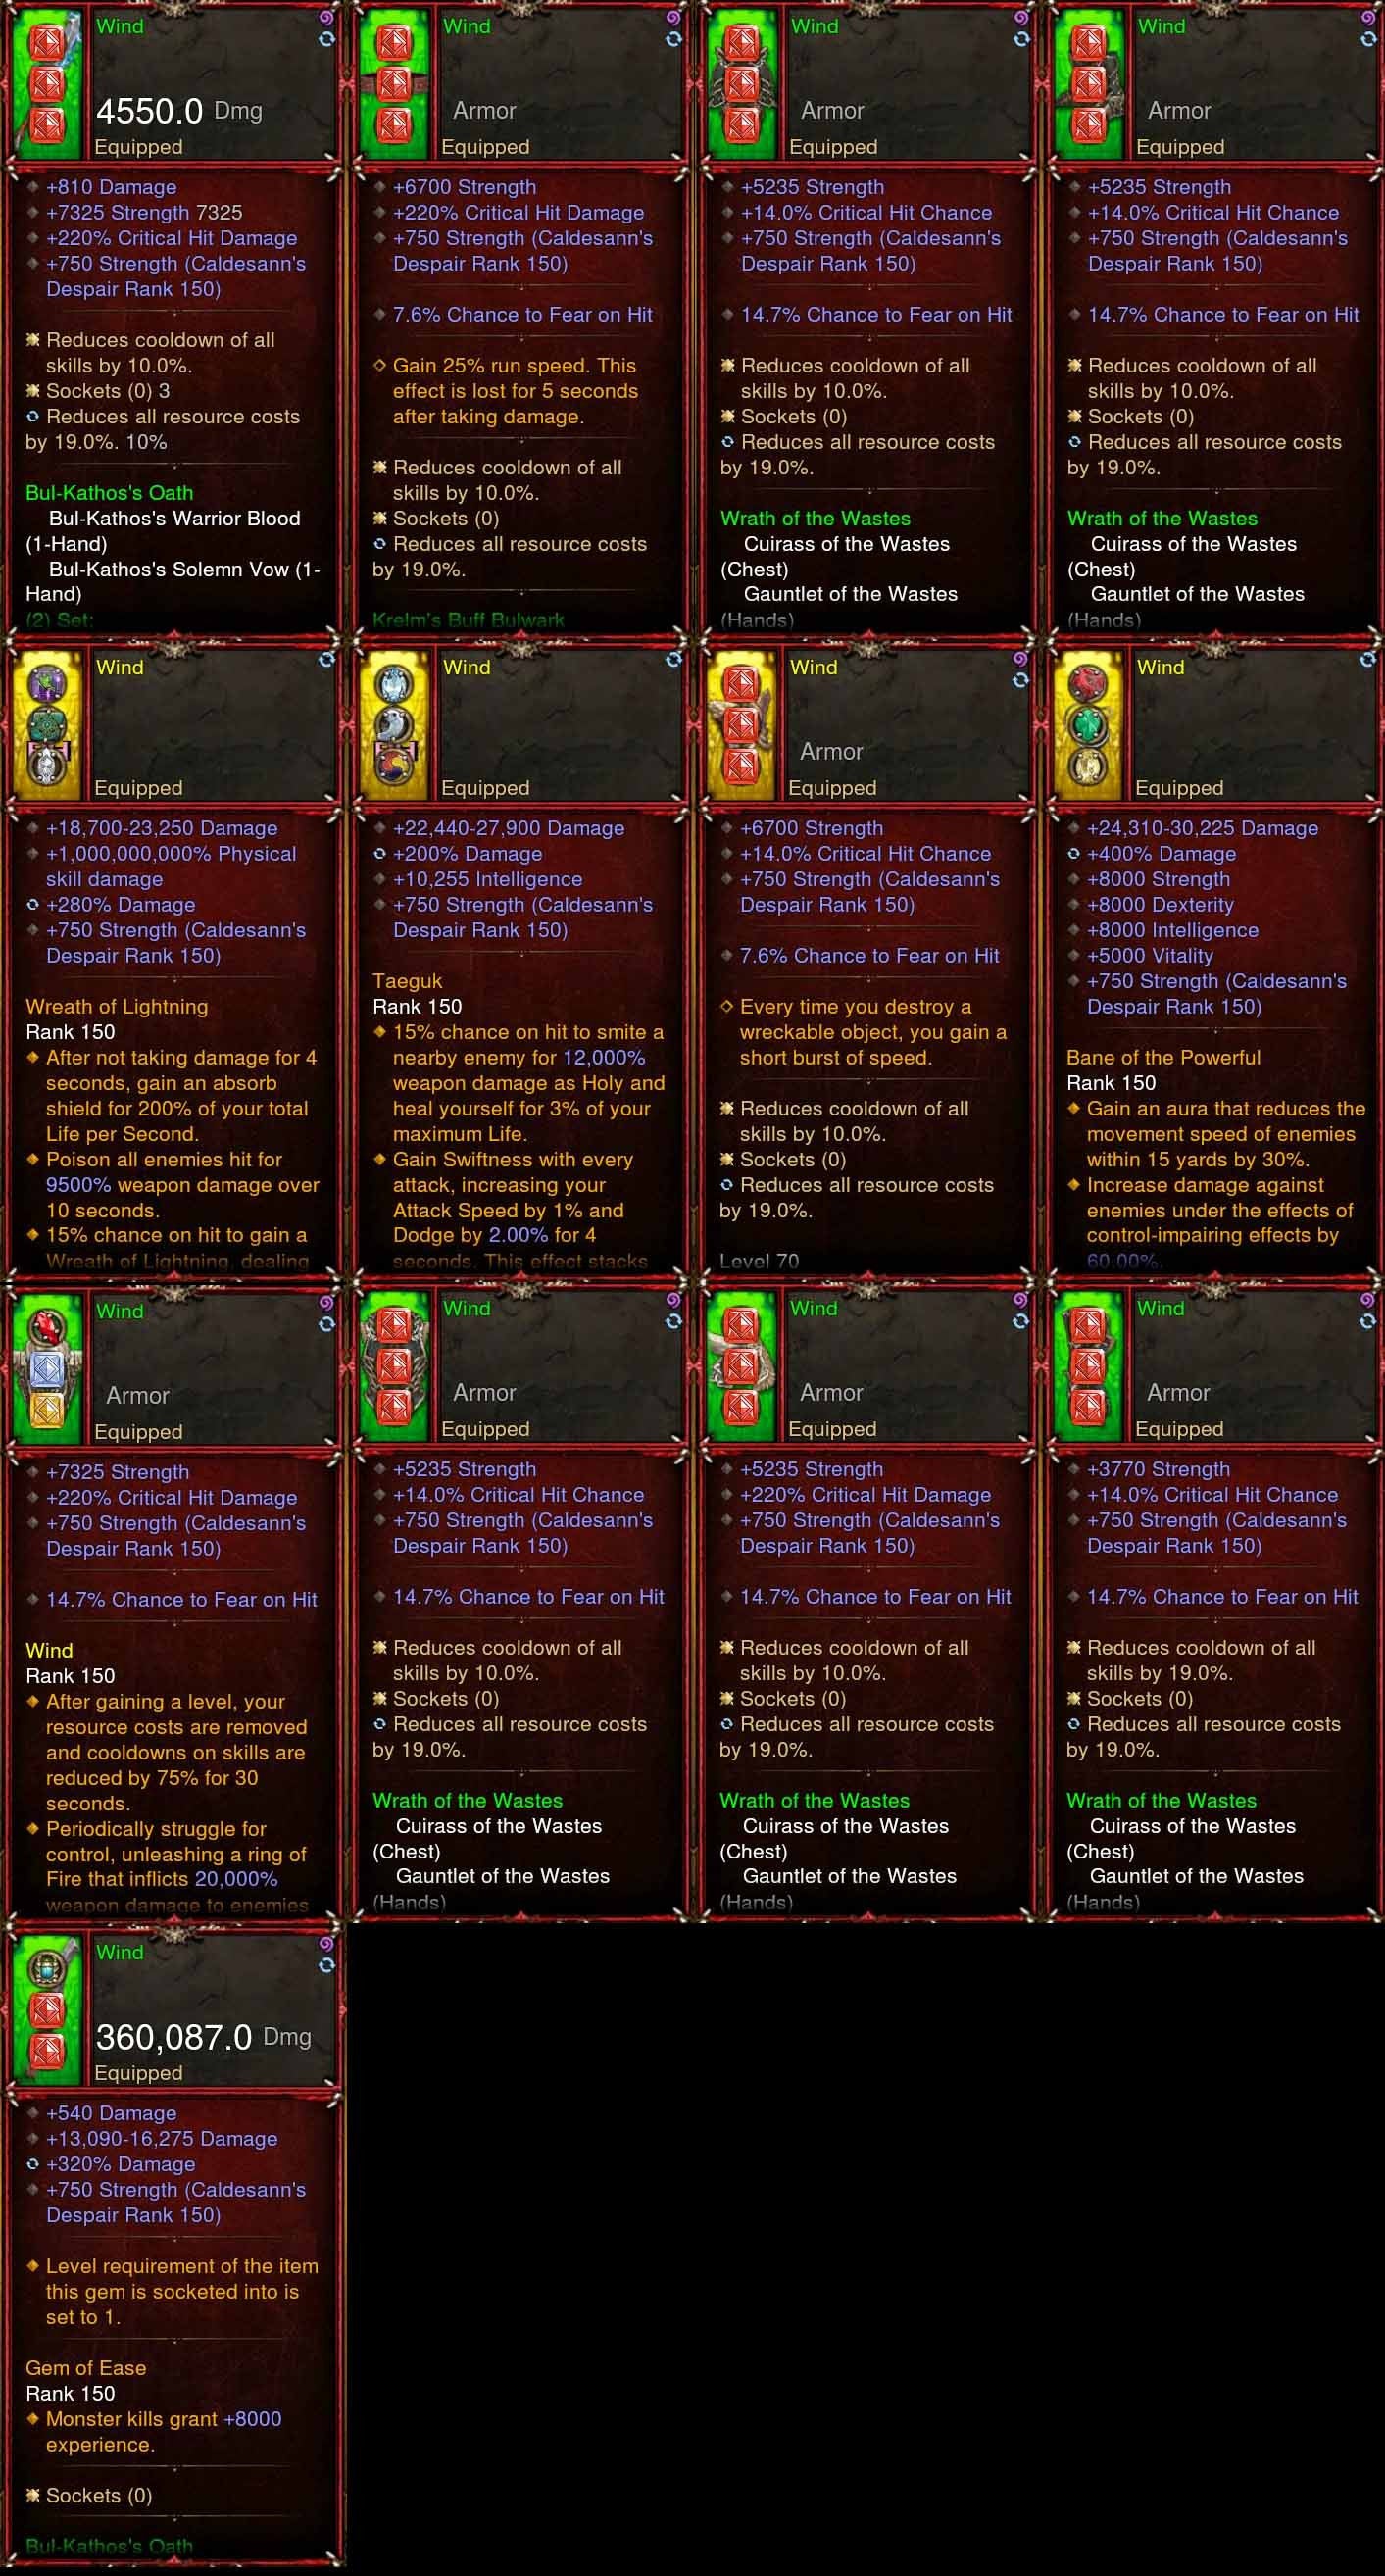 [Primal Ancient] Diablo 3 Immortal v5 Titan FOH Speed WW Waste Barbarian Modded Set for Rift 150 Wind Diablo 3 Mods ROS Seasonal and Non Seasonal Save Mod - Modded Items and Gear - Hacks - Cheats - Trainers for Playstation 4 - Playstation 5 - Nintendo Switch - Xbox One